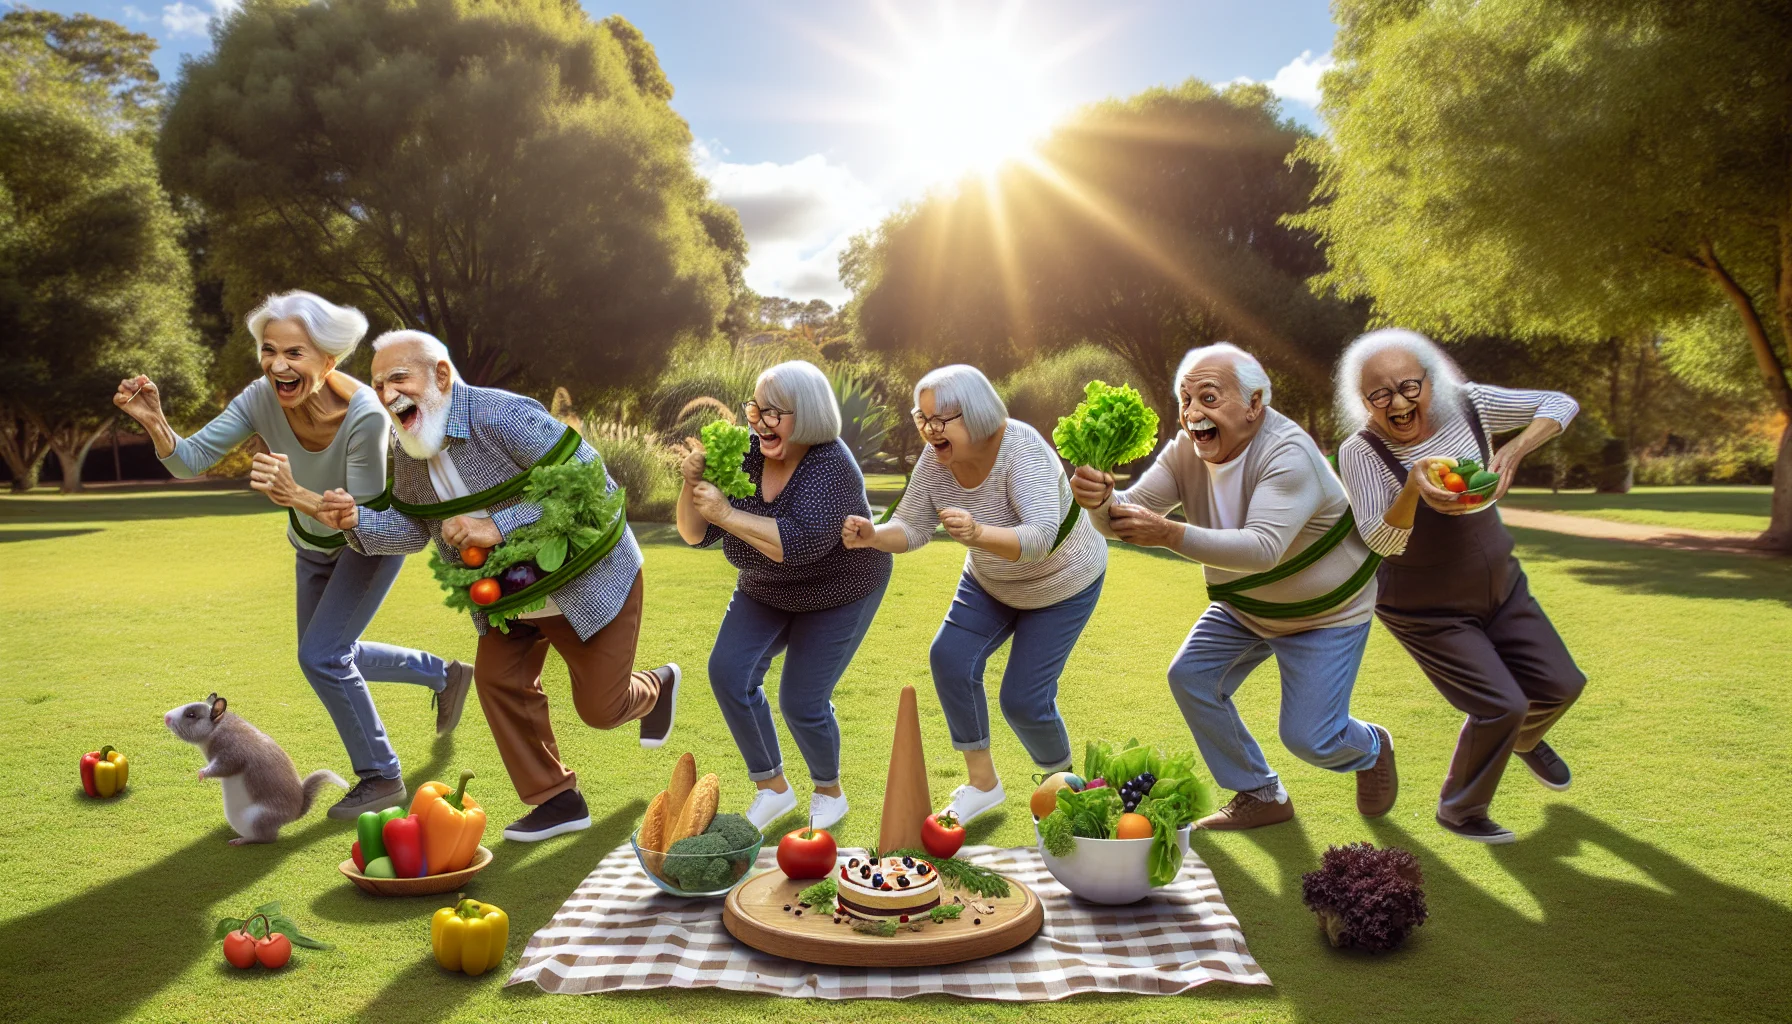 For showcasing Healthy Aging Month, design a humorous, true-to-life scene set in a sunny park. Show a group of elderly individuals from a variety of descents like Hispanic, Caucasian, Black, Middle-Eastern and South Asian, engaged in different funny scenarios all related to diets and healthy eating. One person can be fastidiously measuring lettuce leaves for a salad, another might be chasing after a vegetable that has rolled away, while another might be mischievously trying to hide a cake behind their back. All are laughing and thoroughly enjoying their time outdoors, reflecting the joys of healthy aging.